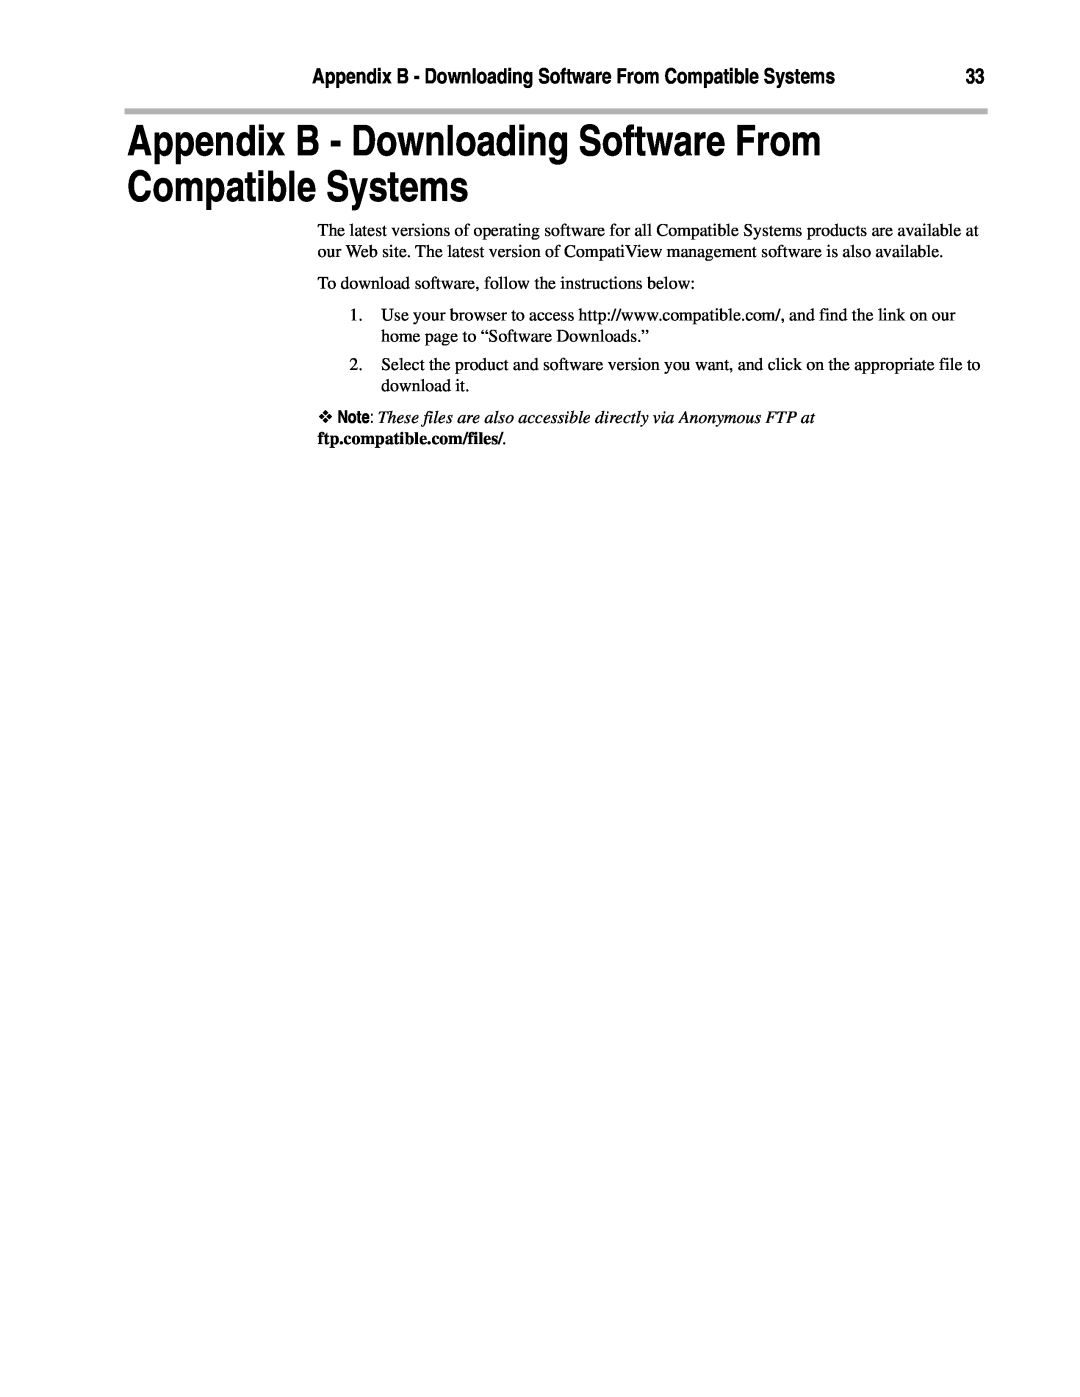 Compatible Systems Enterprise-8, A00-1869 manual Appendix B - Downloading Software From Compatible Systems 